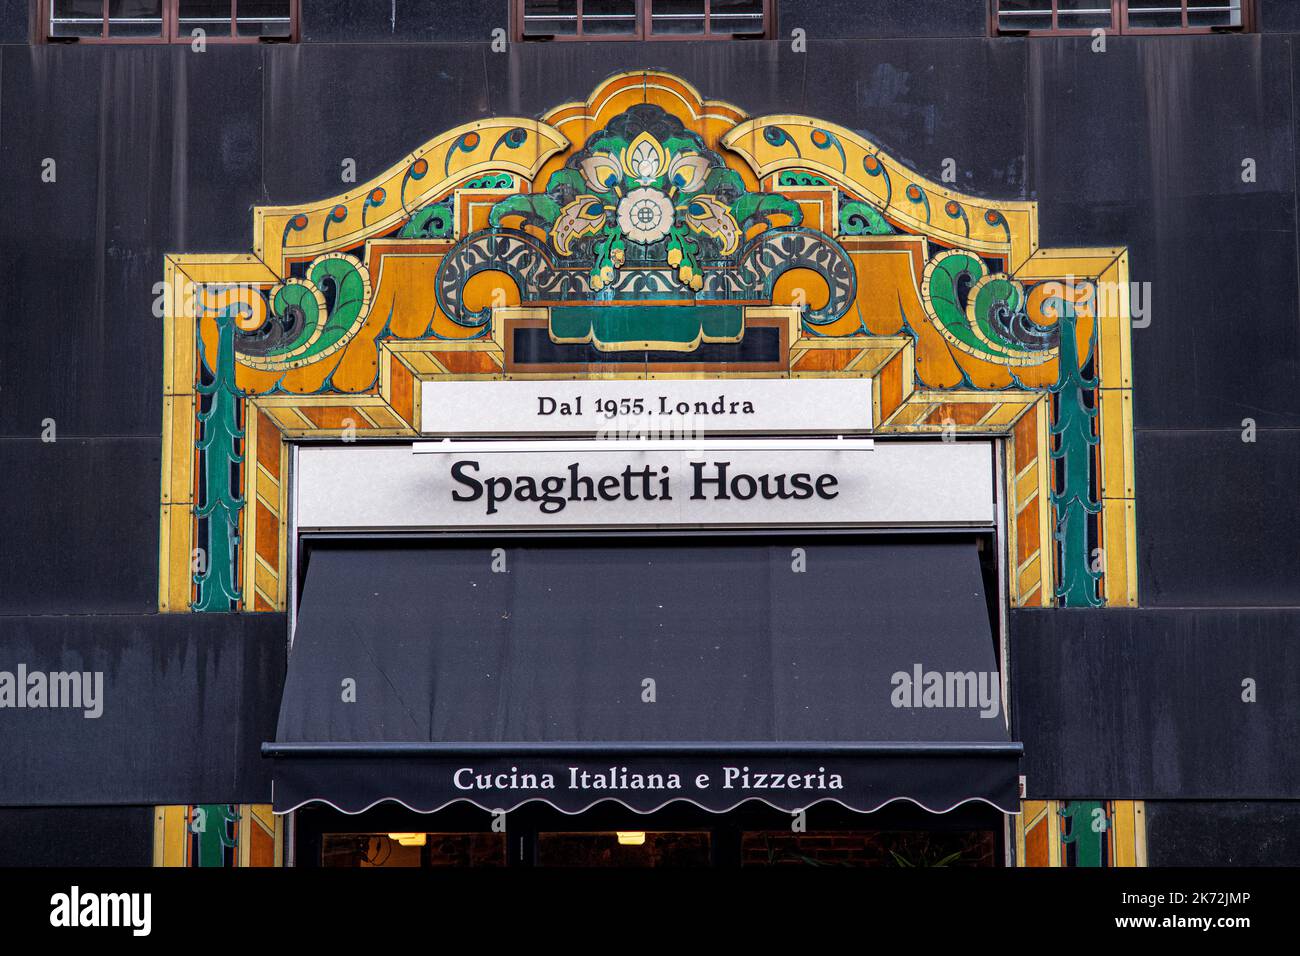 Spaghetti House Argyll Street London - Argyll St is one of a number of Central London branches of the Spaghetti House restaurant chain founded 1955. Stock Photo